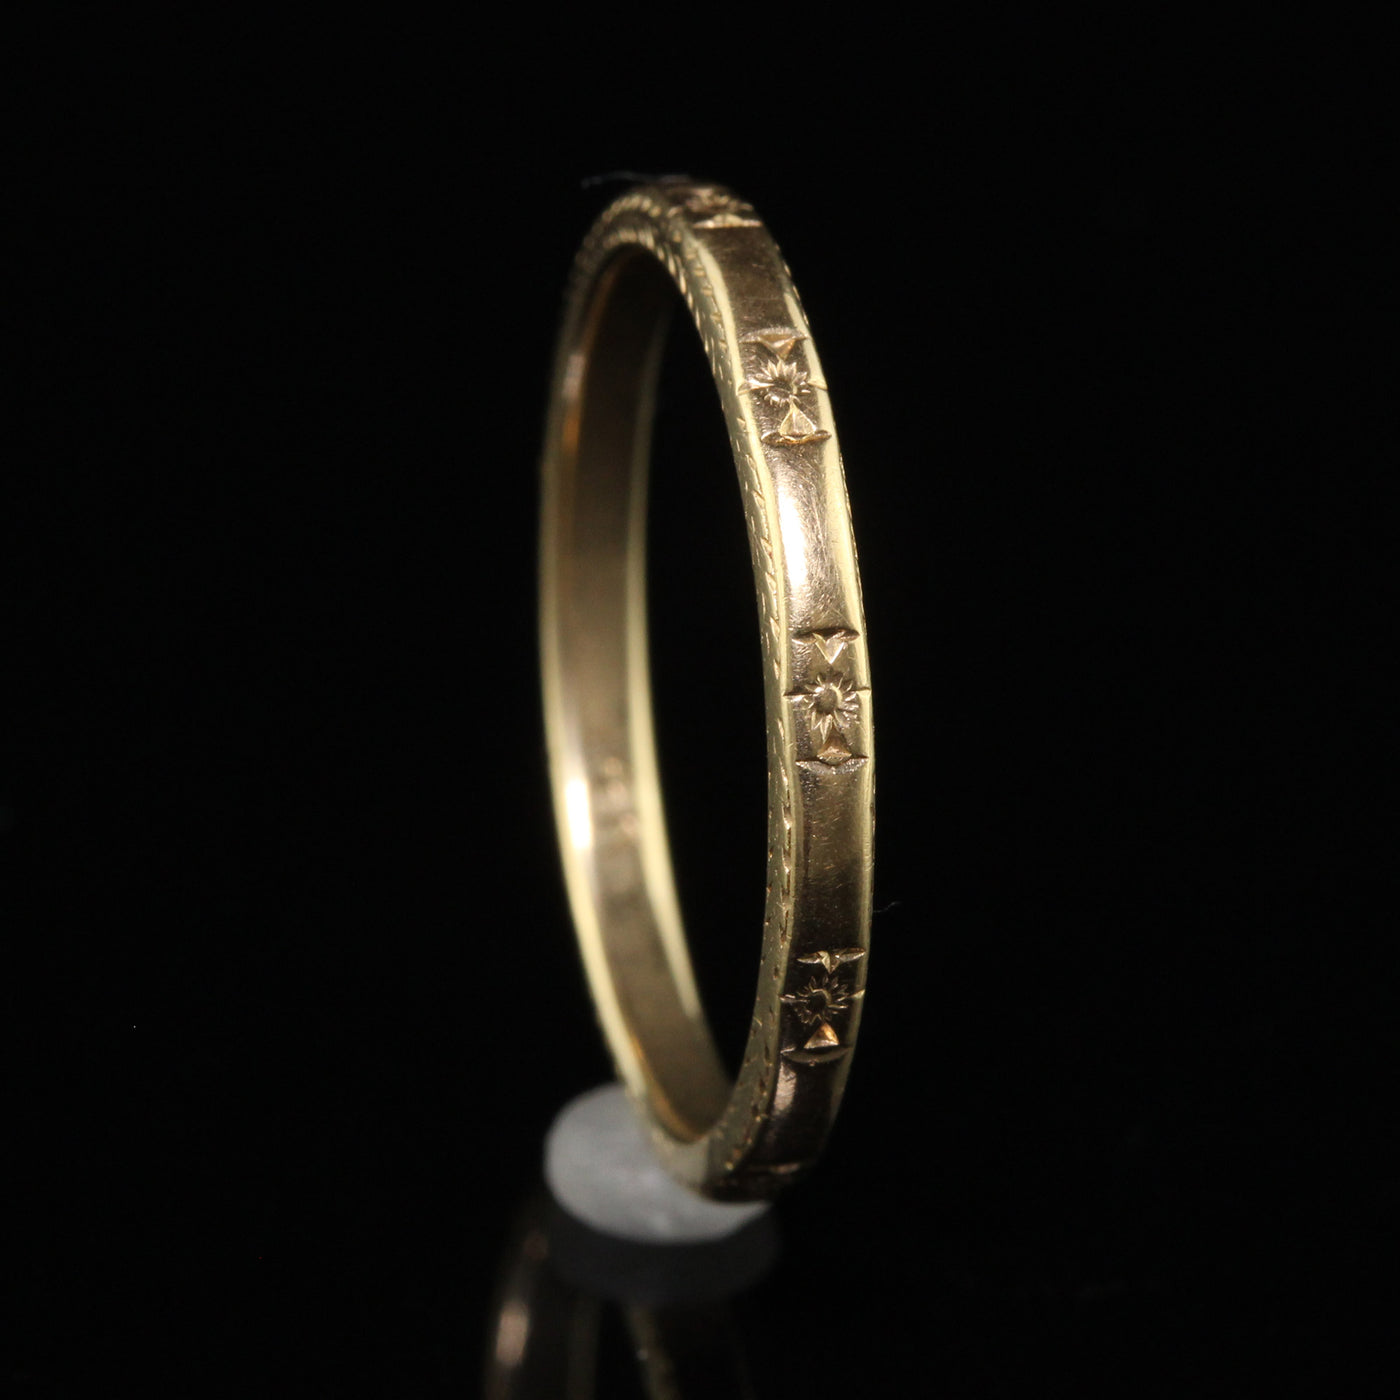 Antique Art Deco 14K Yellow Gold Engraved Wedding Band - Size 7